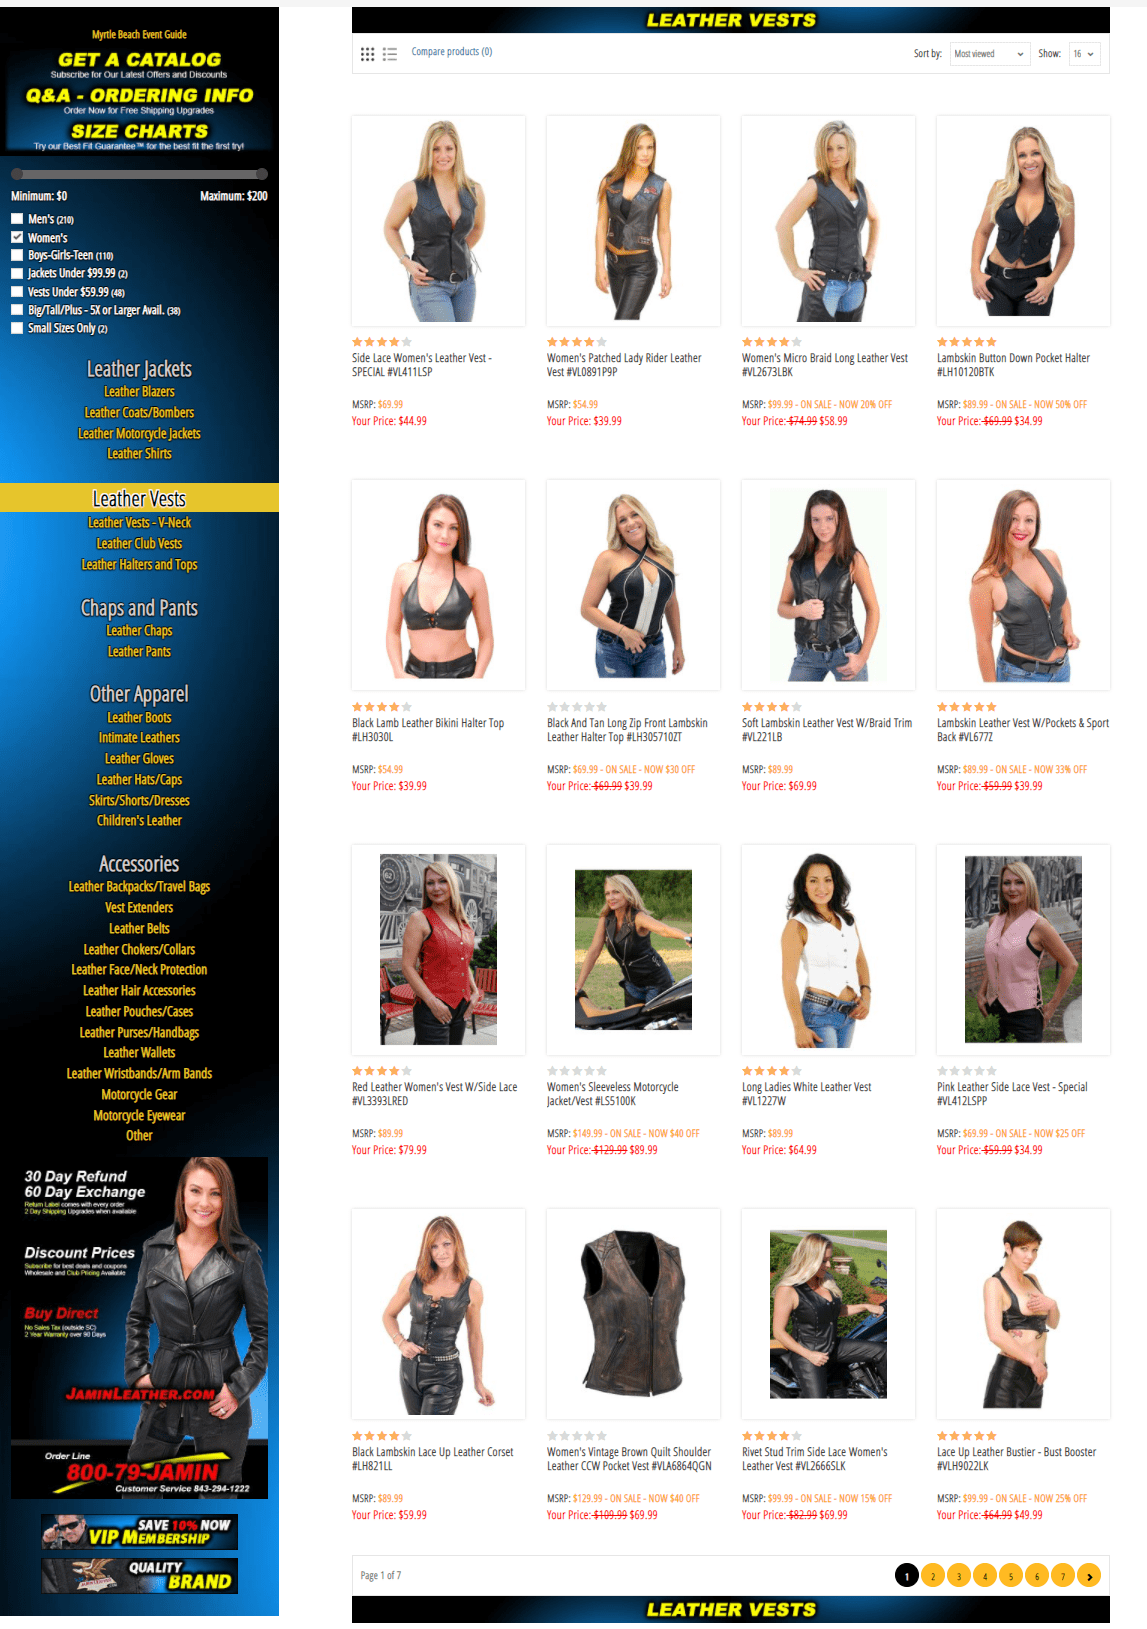 Women's Leather Vests - Jamin Leather